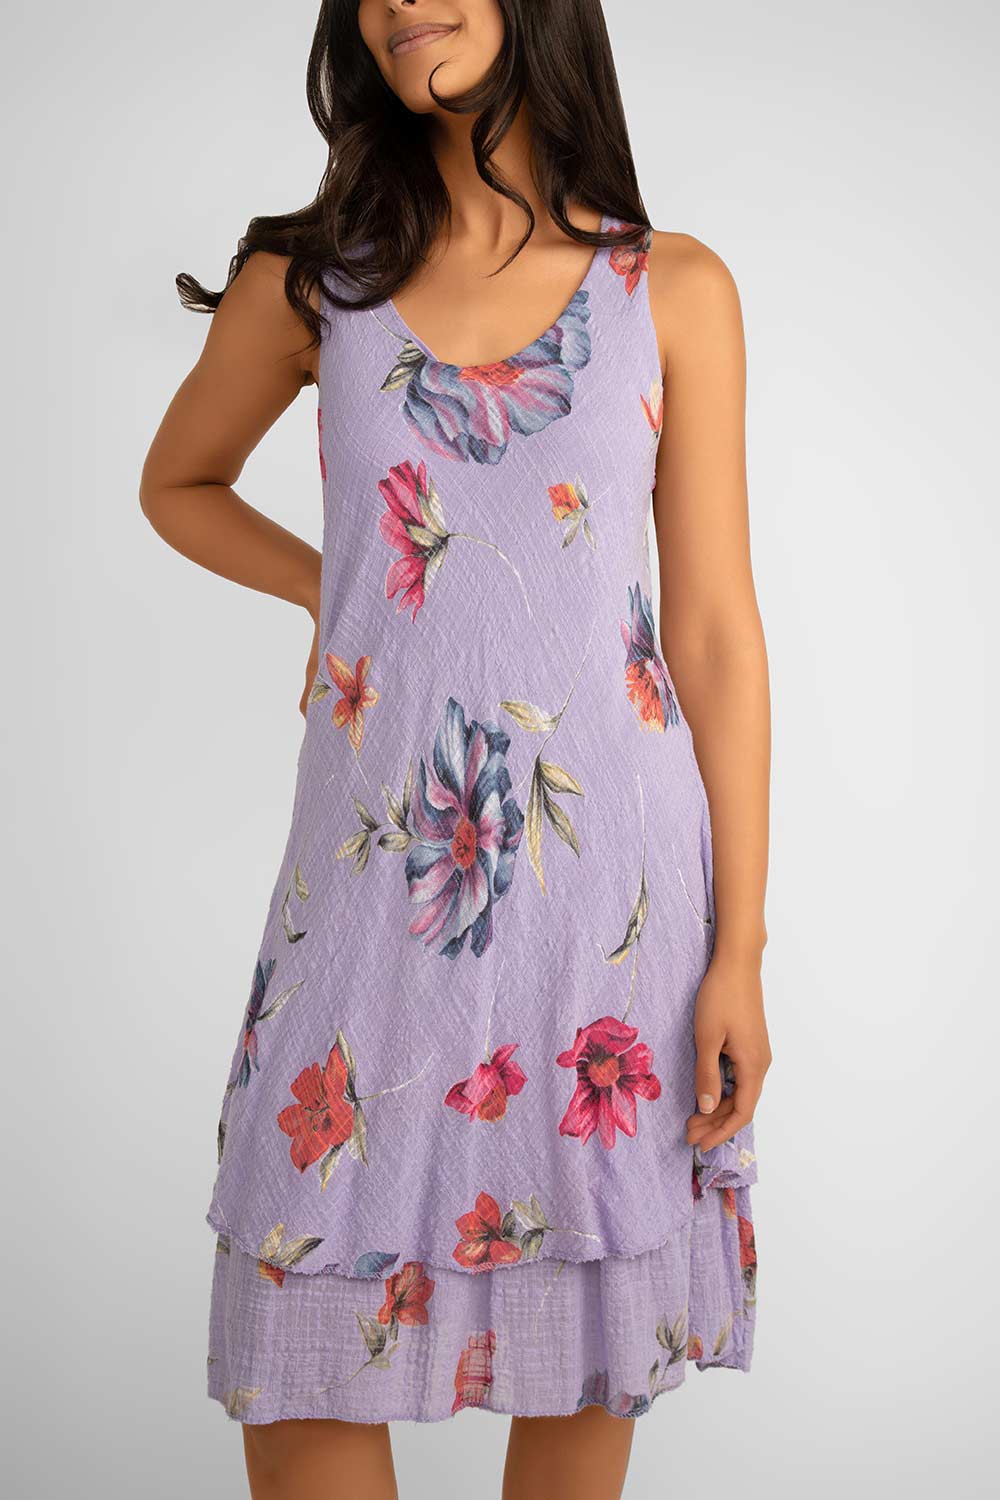 Close up front view of Me & Gee (S24-16-HL8903) Women's Sleeveless Floral Gauze Dress With Layered Knee Length Skirt in Lilac Purple with Floral Print